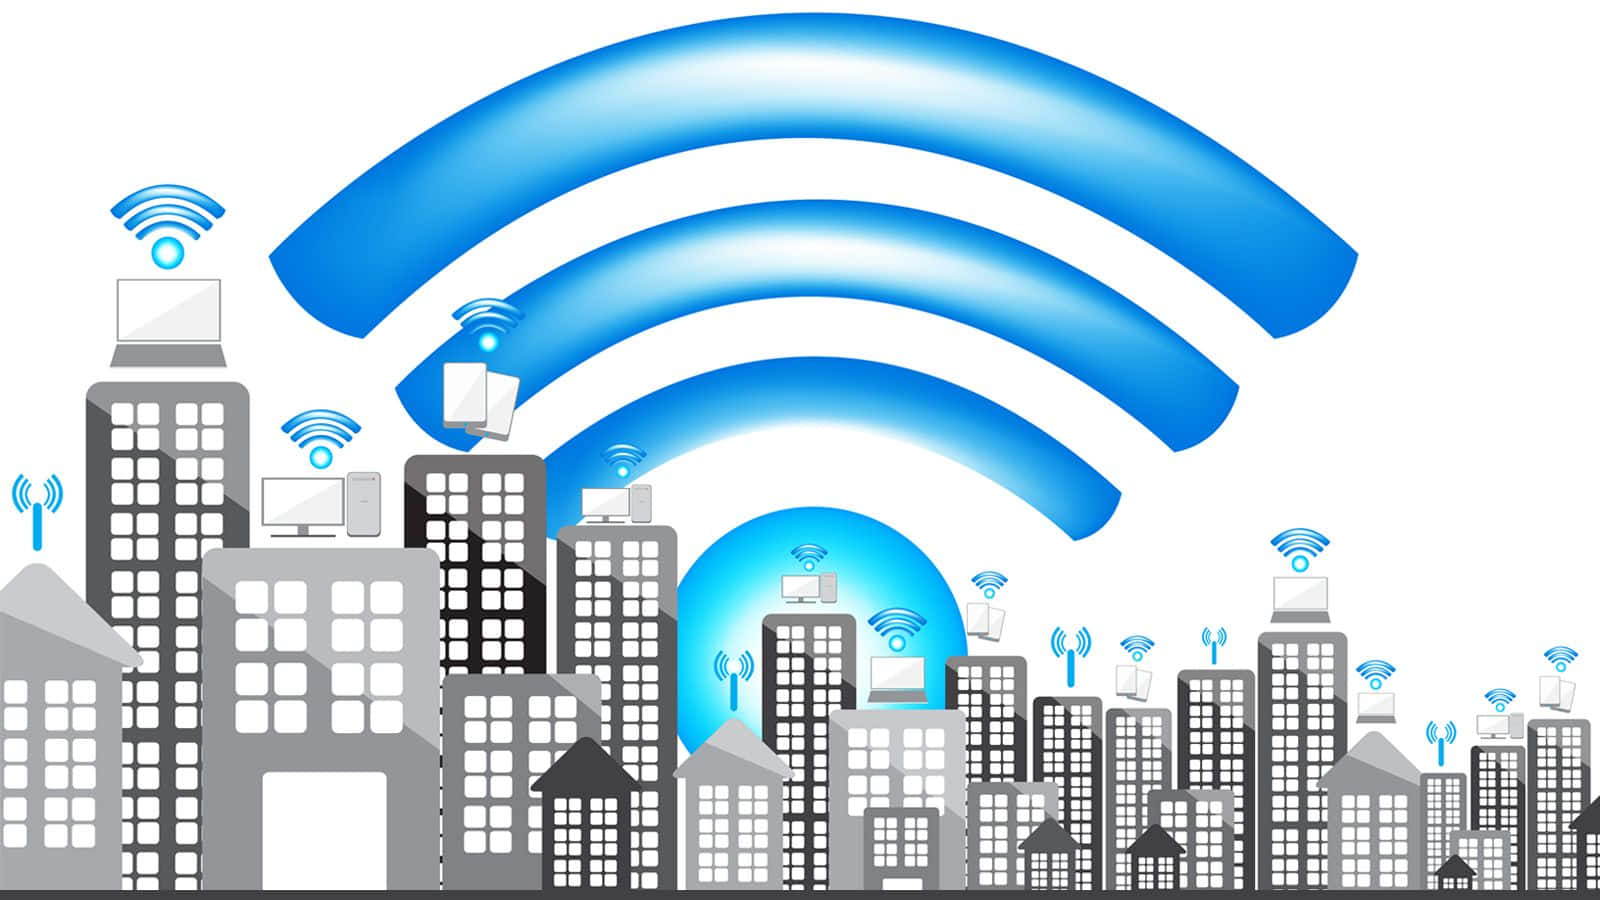 Stay Connected With 3g/4g Lte Wireless Coverage